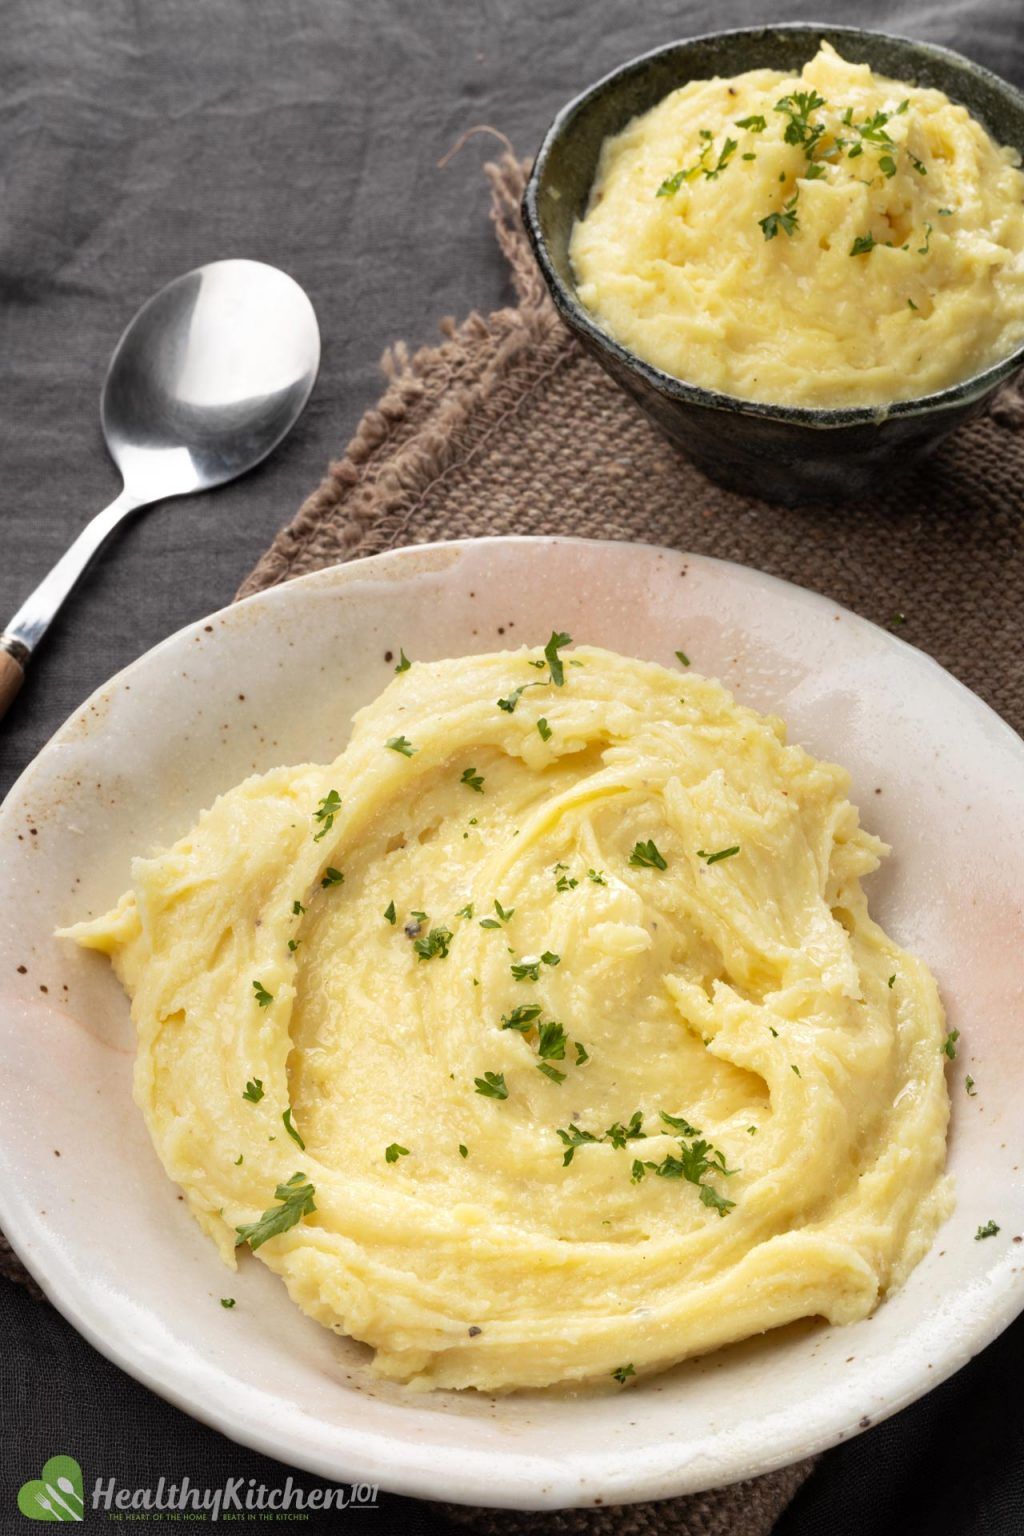 Mashed Potatoes Recipe A Healthy Side Dish Made from Scratch